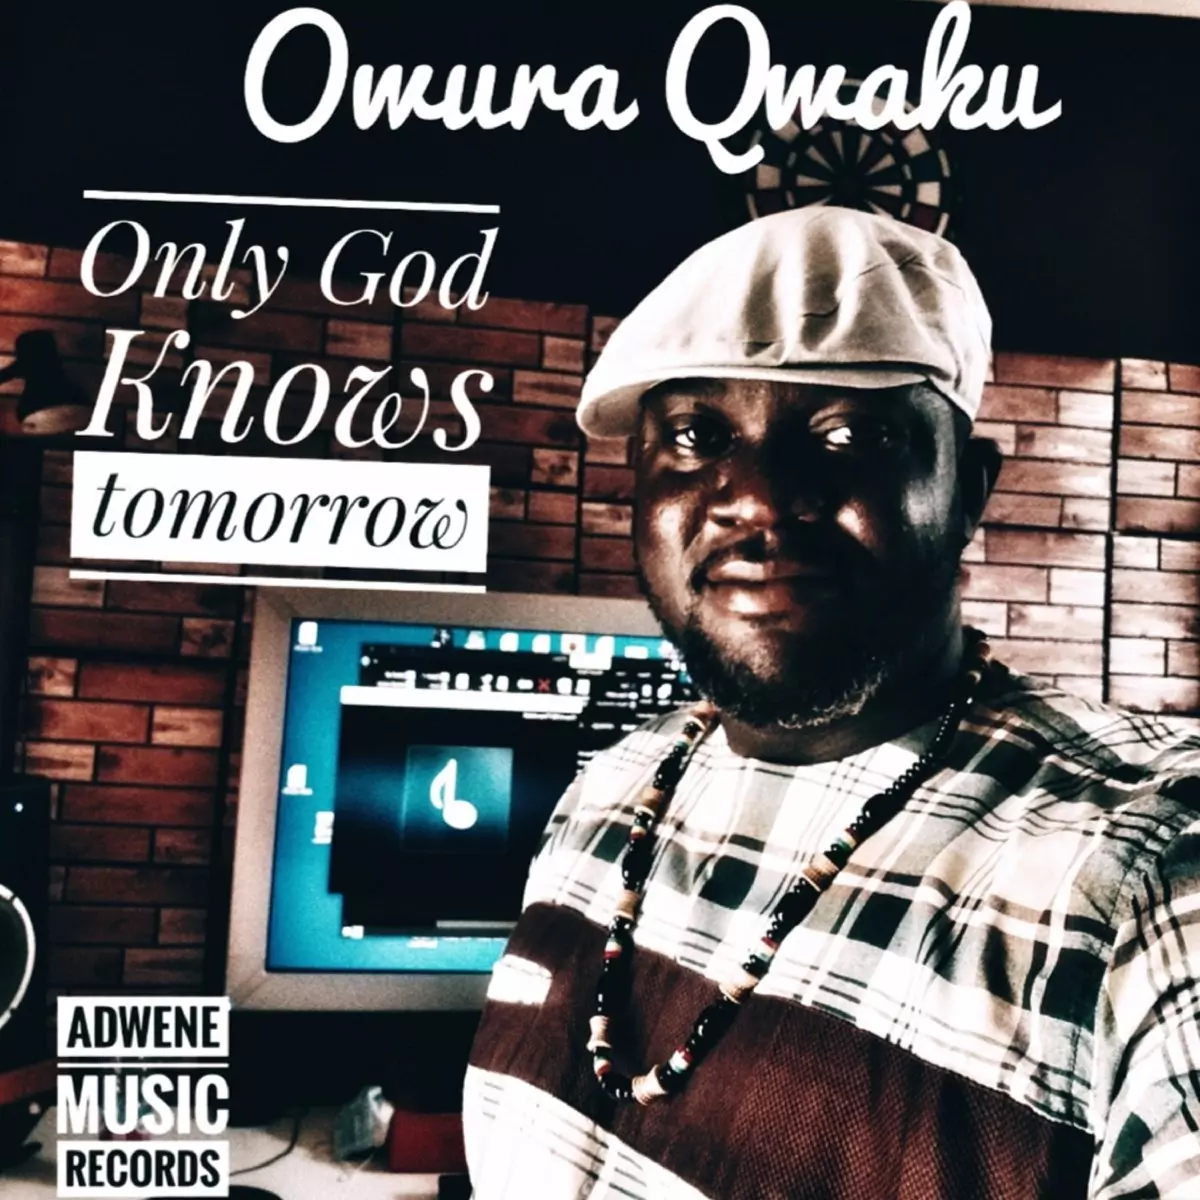 Only God Knows Tomorrow - Single by Owura Qwaku on Apple Music